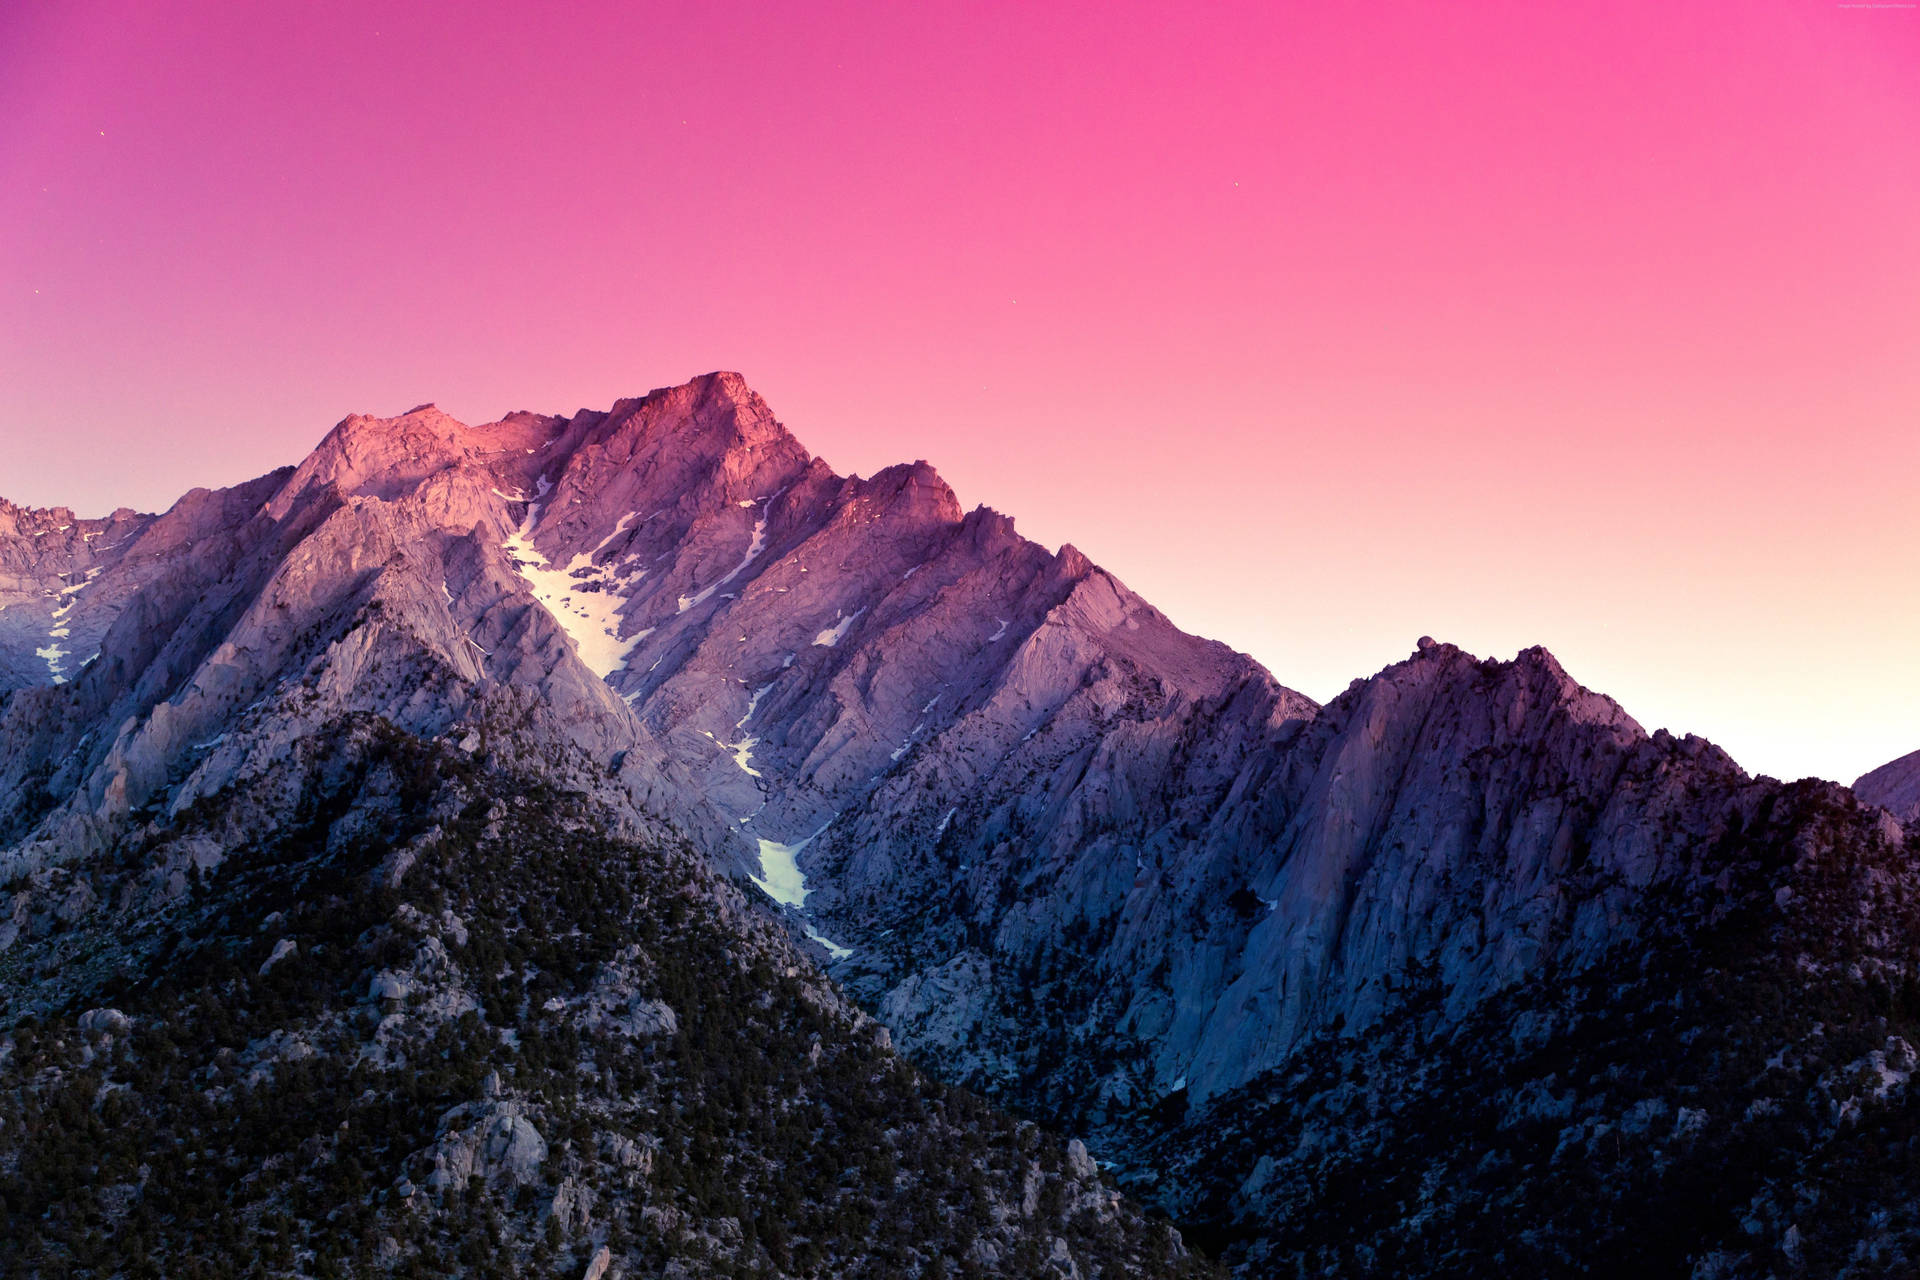 Climb to new heights with the latest Macbook Wallpaper